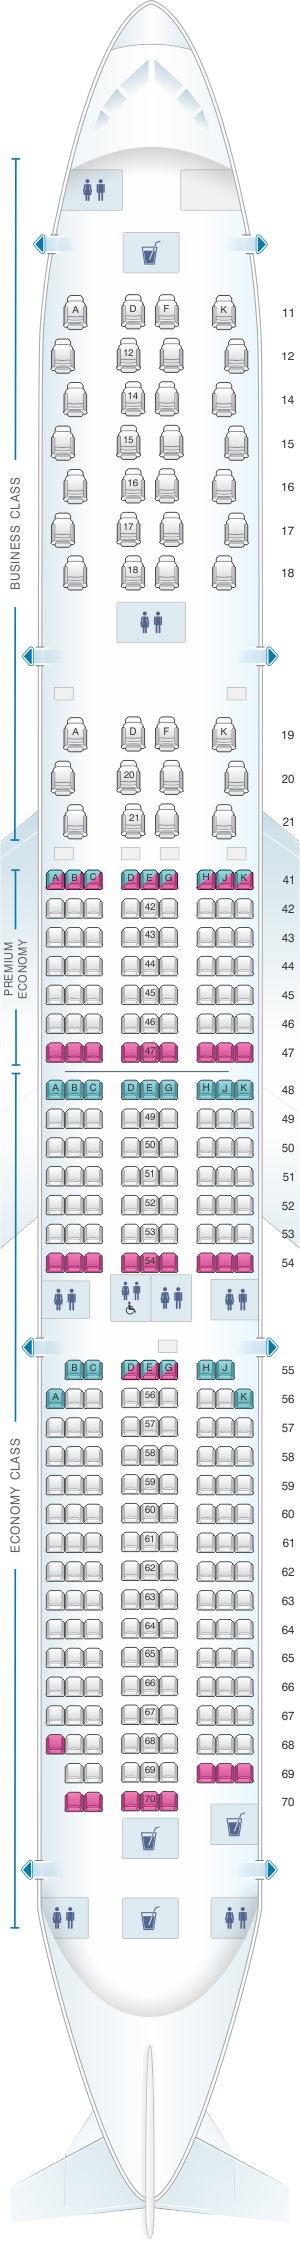 Seat Map Singapore Airlines Airbus A350 900 Config2 2 